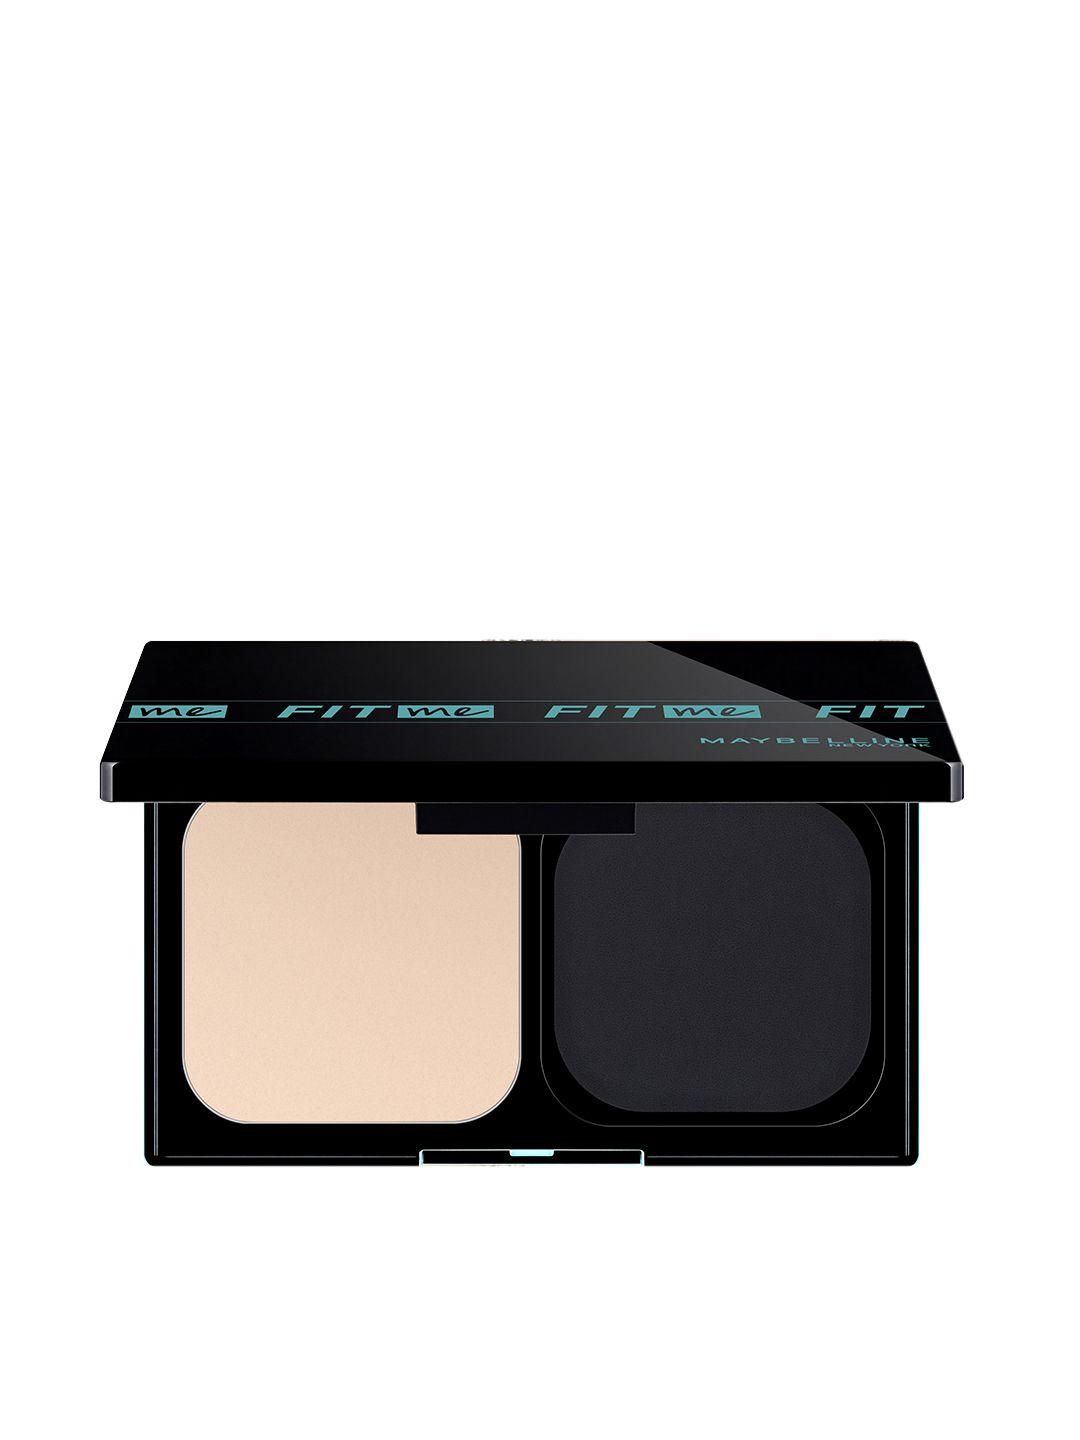 maybelline new york fit me spf 44 ultimate powder foundation - shade 120